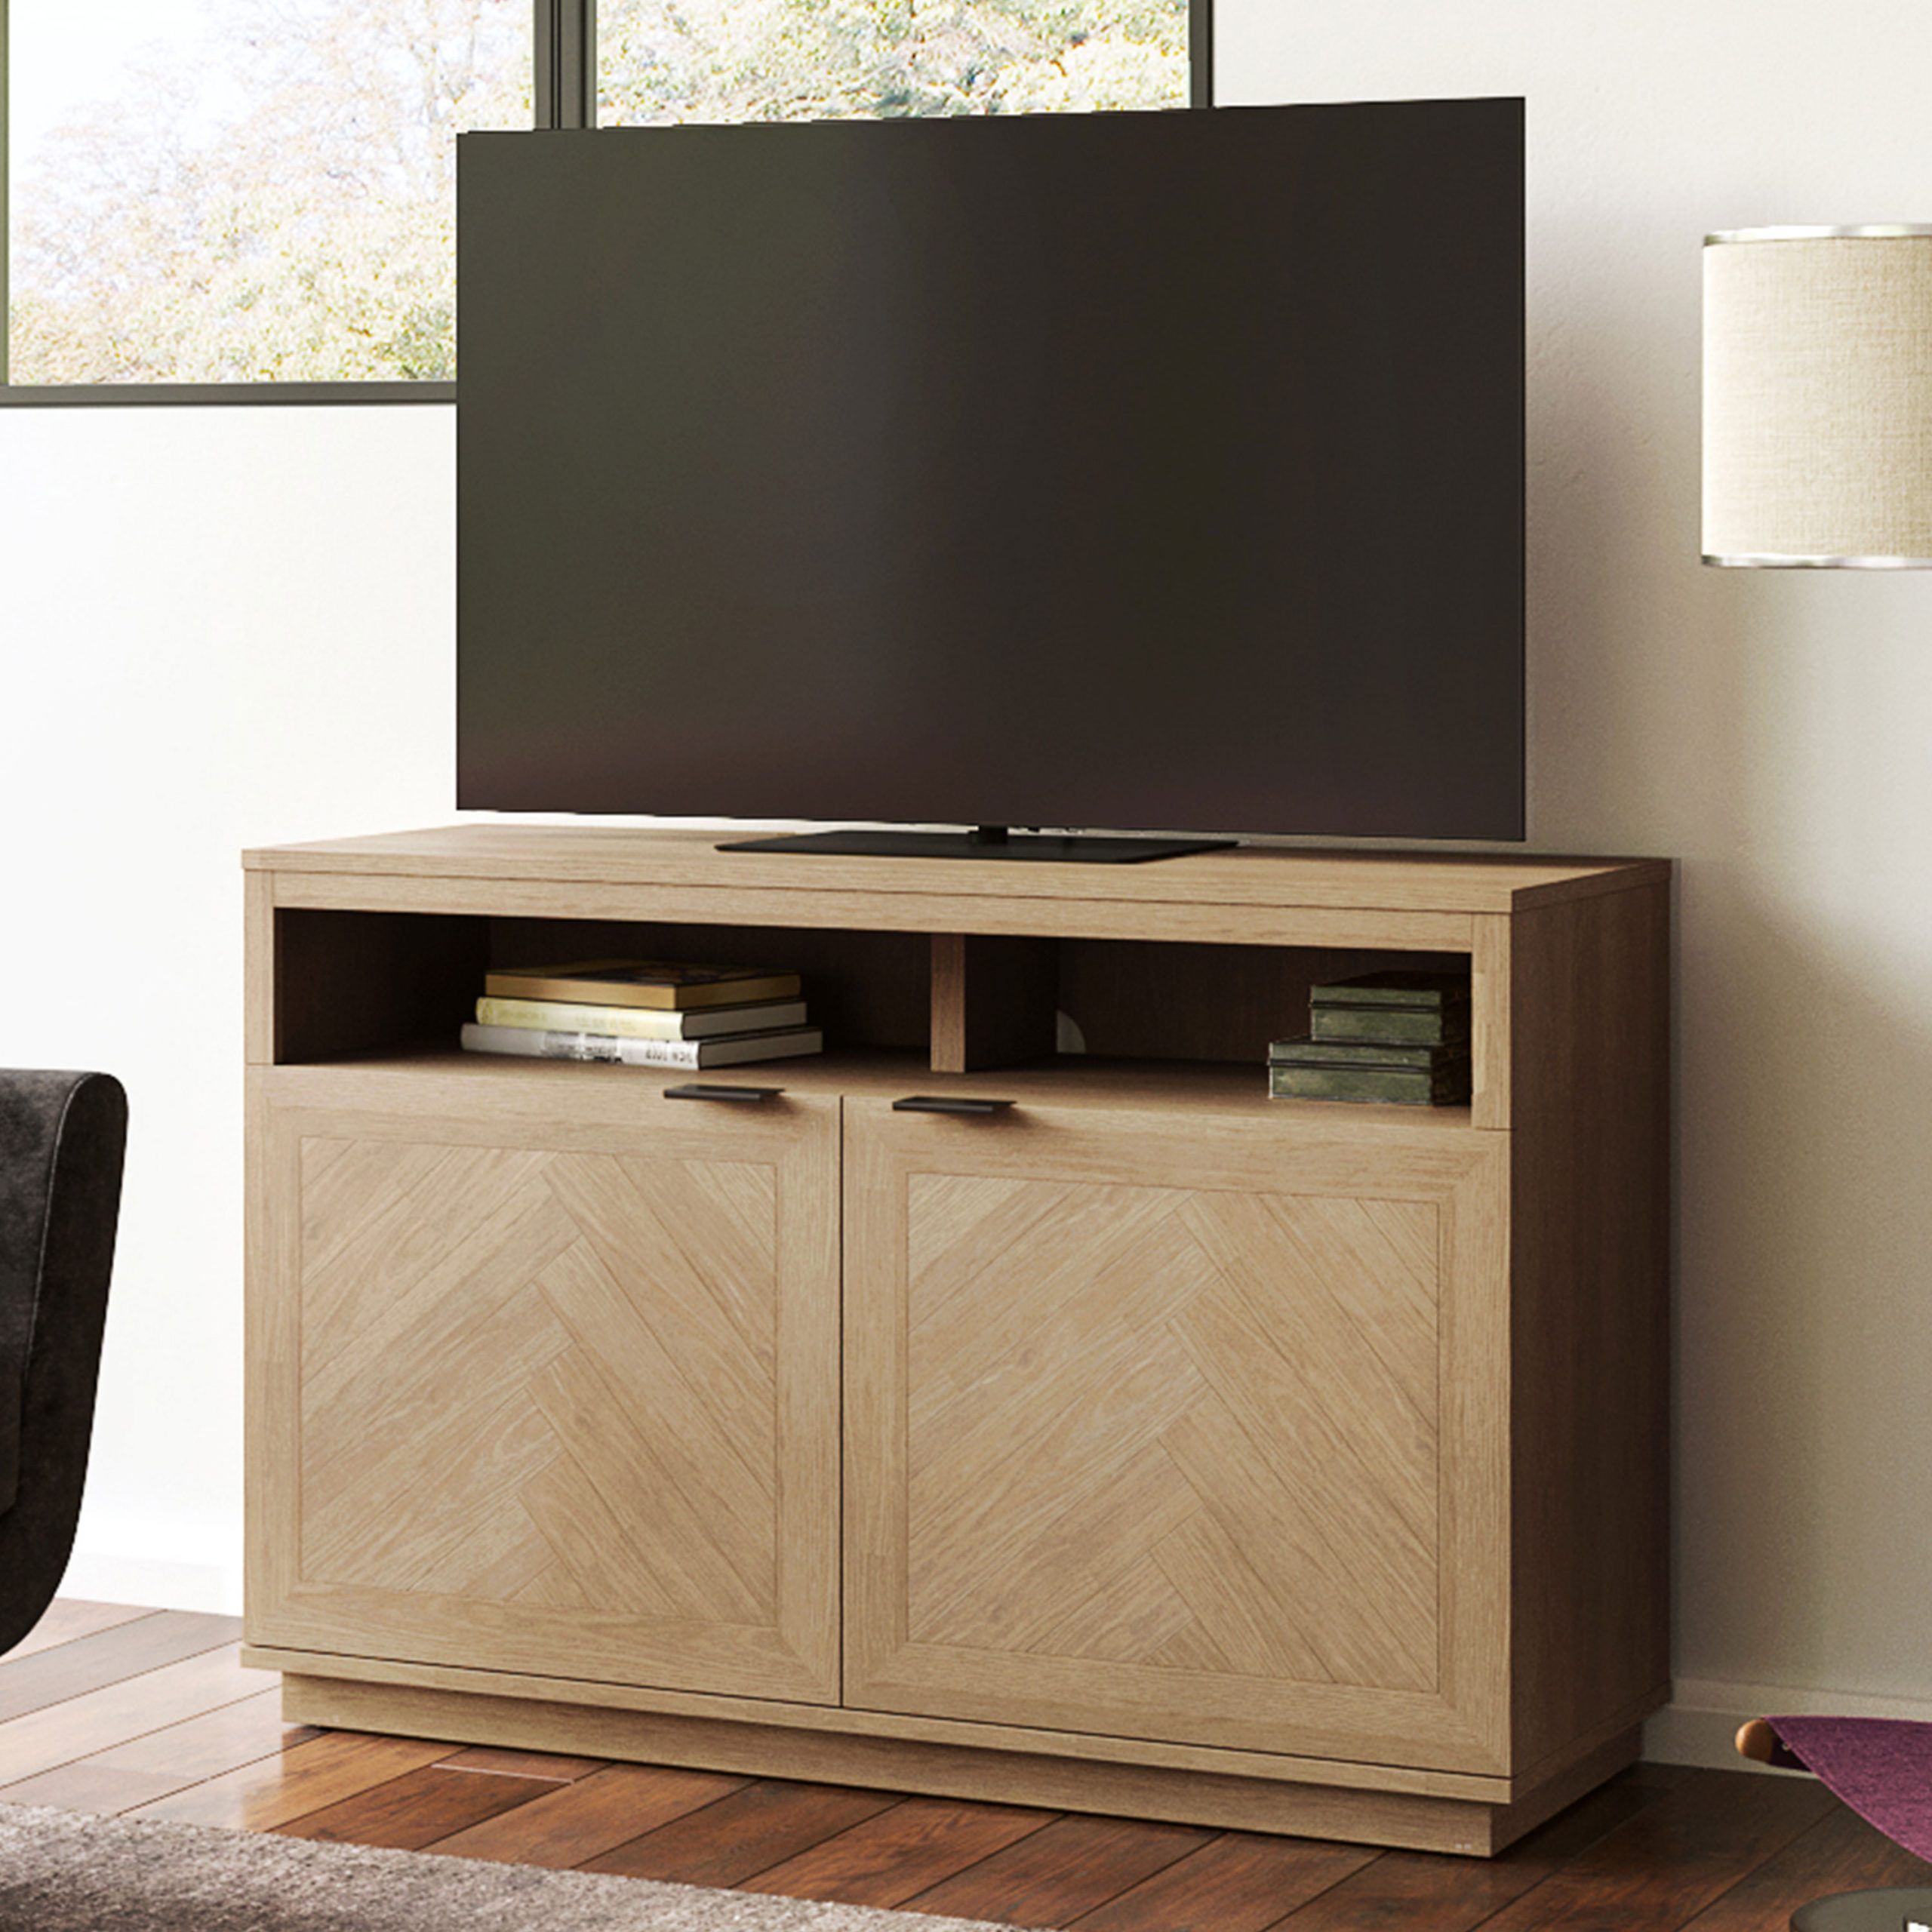 Sahika Tv Stands For Tvs Up To 55" For Current Better Homes & Gardens Hendrix Herringbone Style Tv Stand (View 6 of 25)